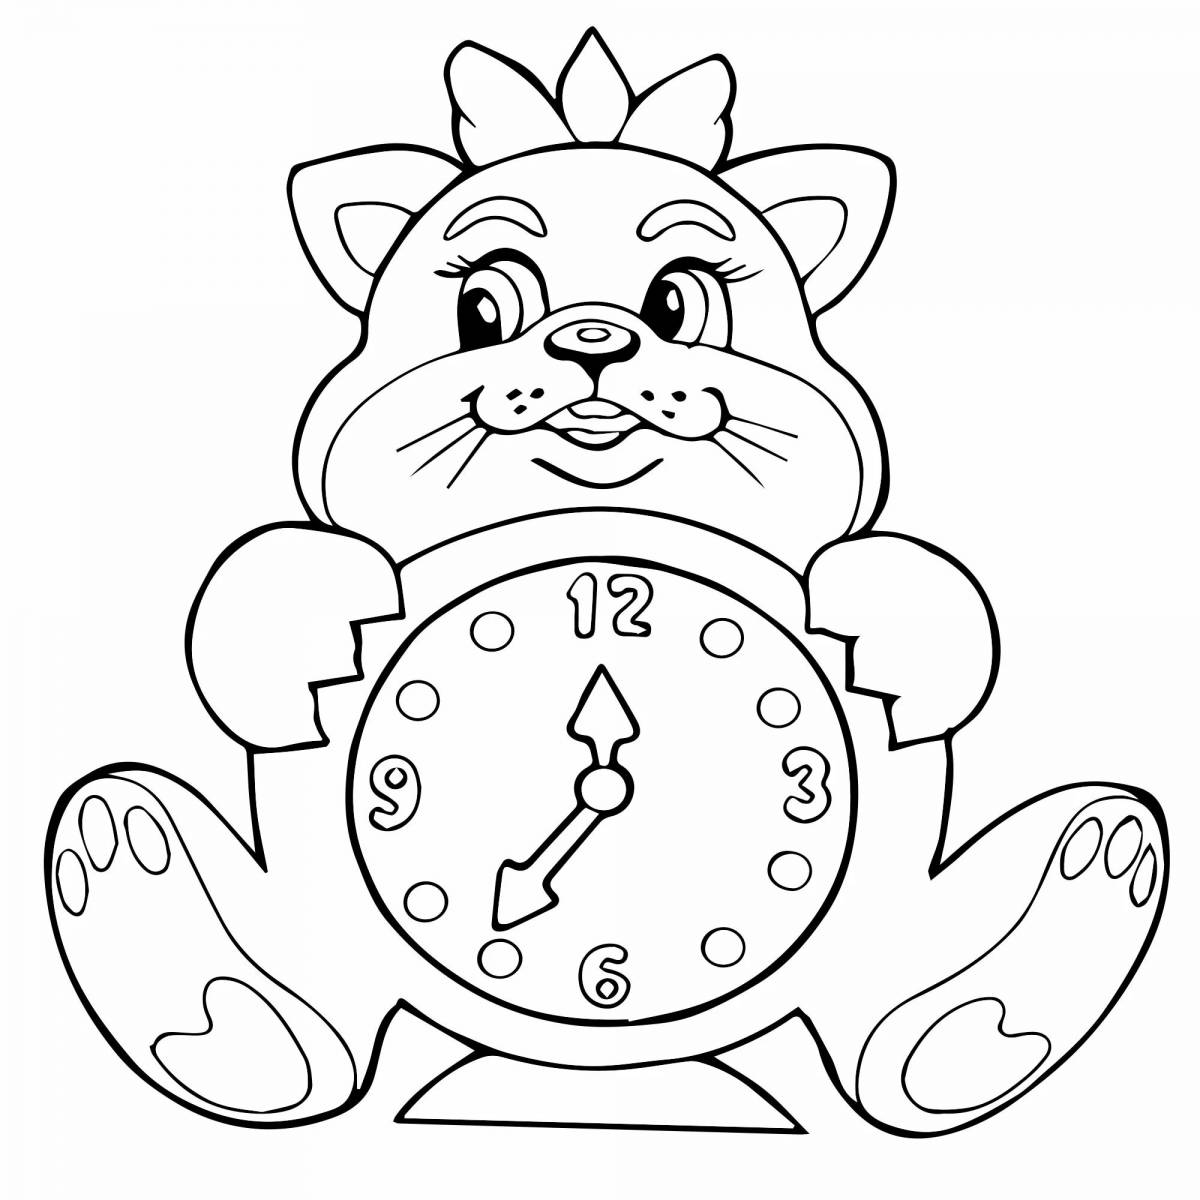 Color-frenzy coloring page hourly